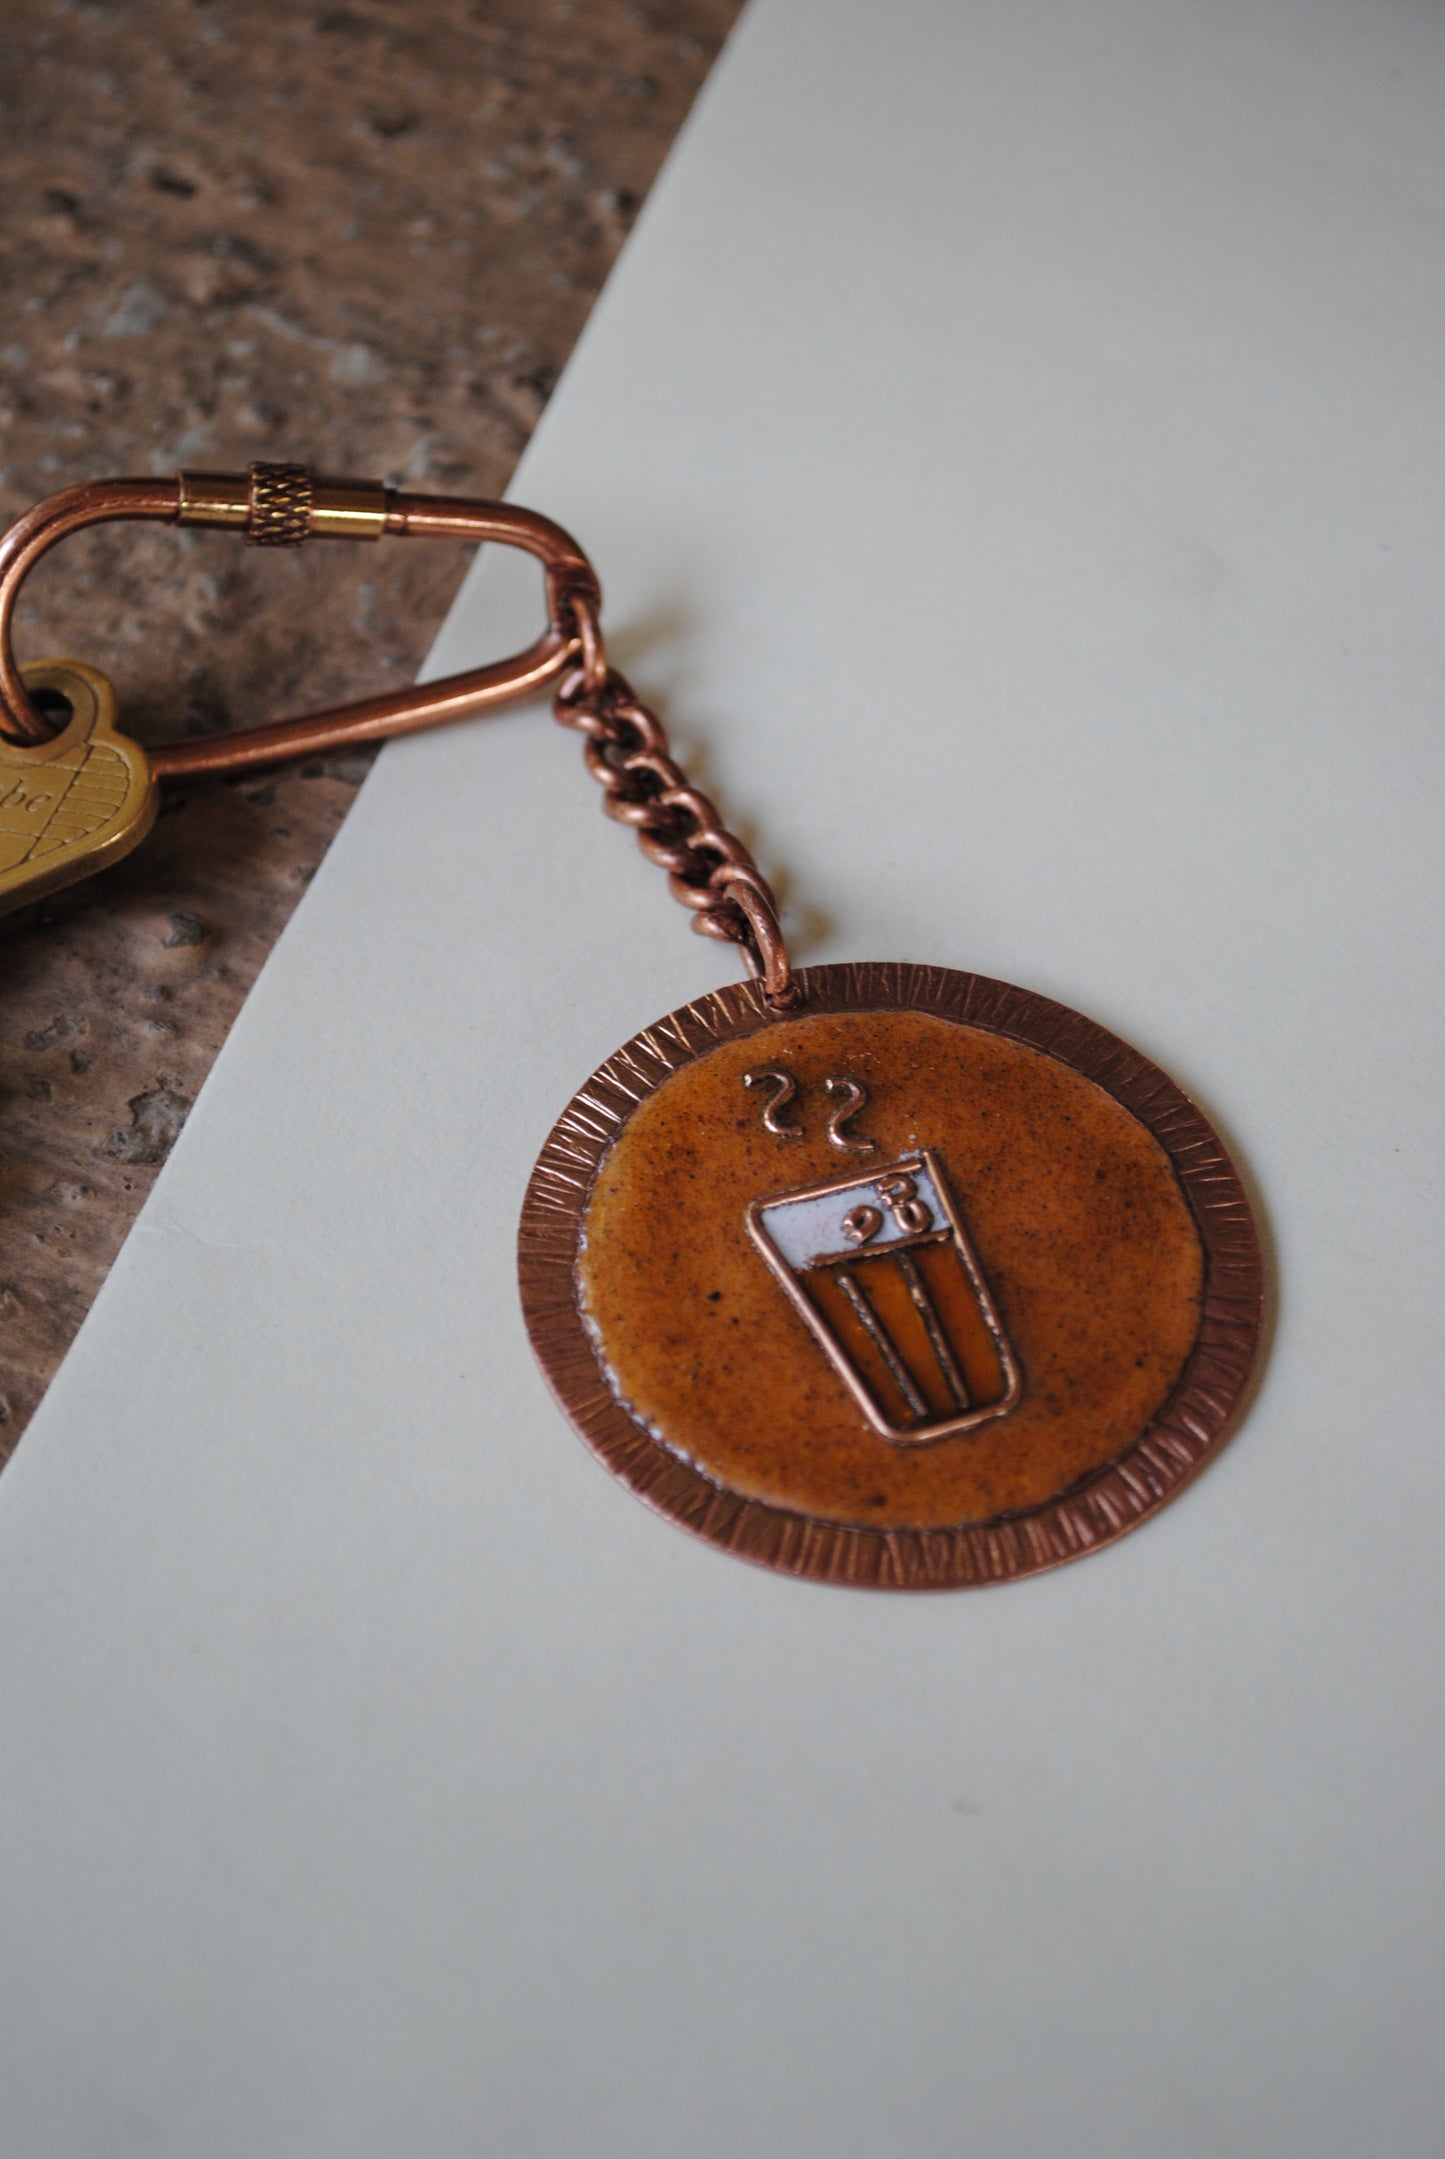 Copper enamel trinkets, funky keychains handcrafted in Maharashtra, India. Chai paani theme